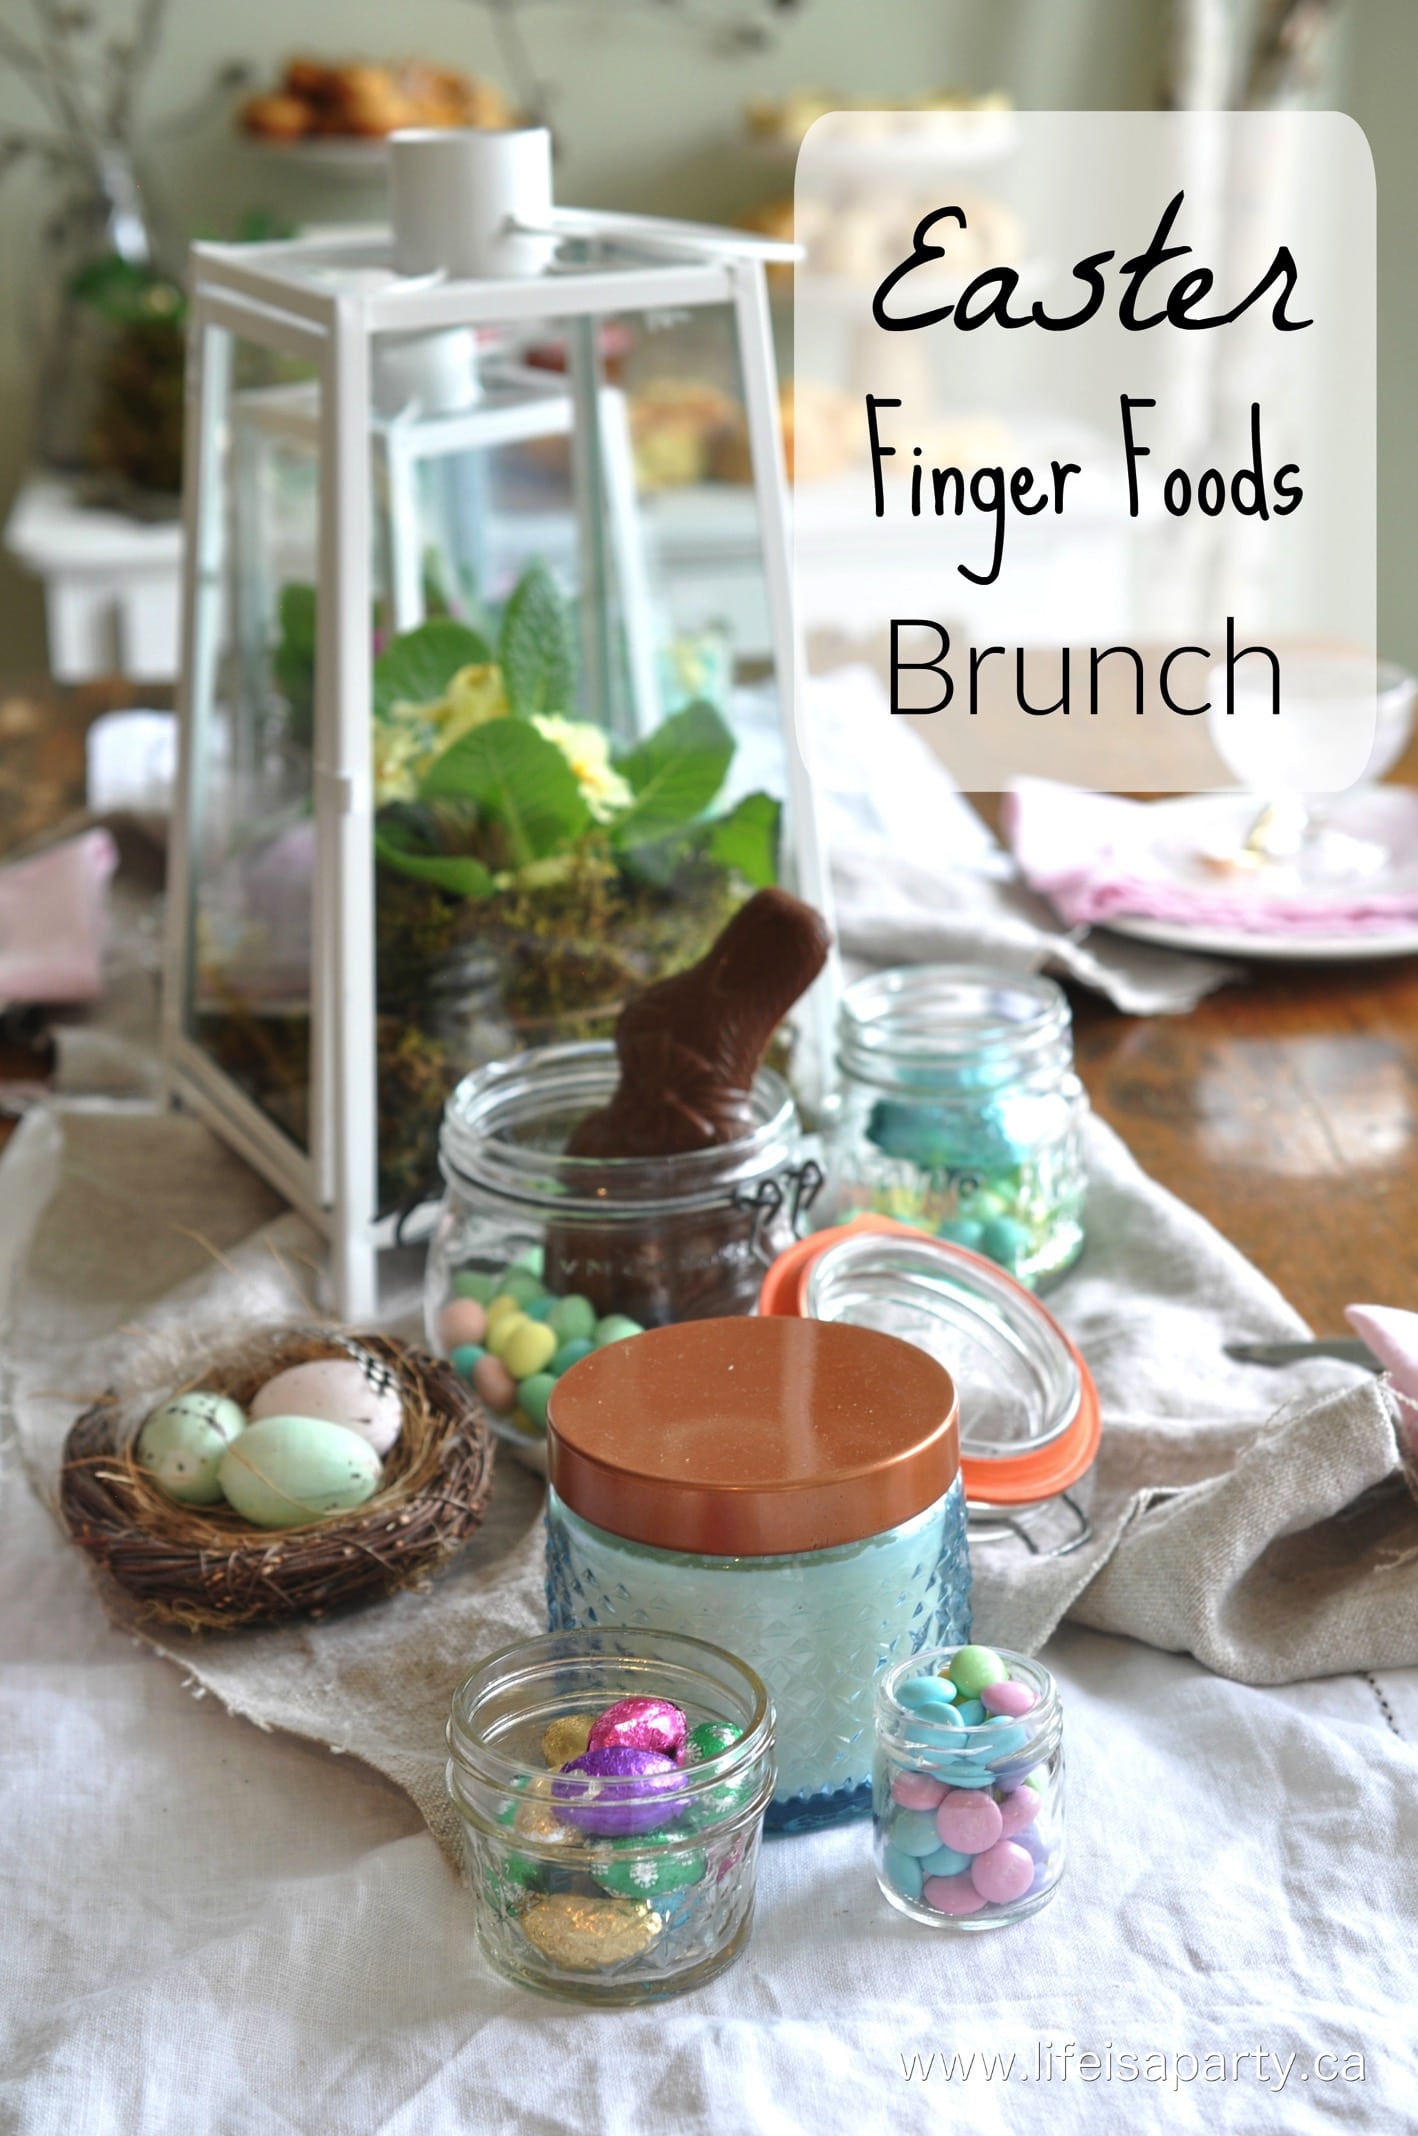 Easter Finger Foods Brunch: the perfect, no fuss Easter brunch menu with breakfast finger foods and Easter table decor ideas.